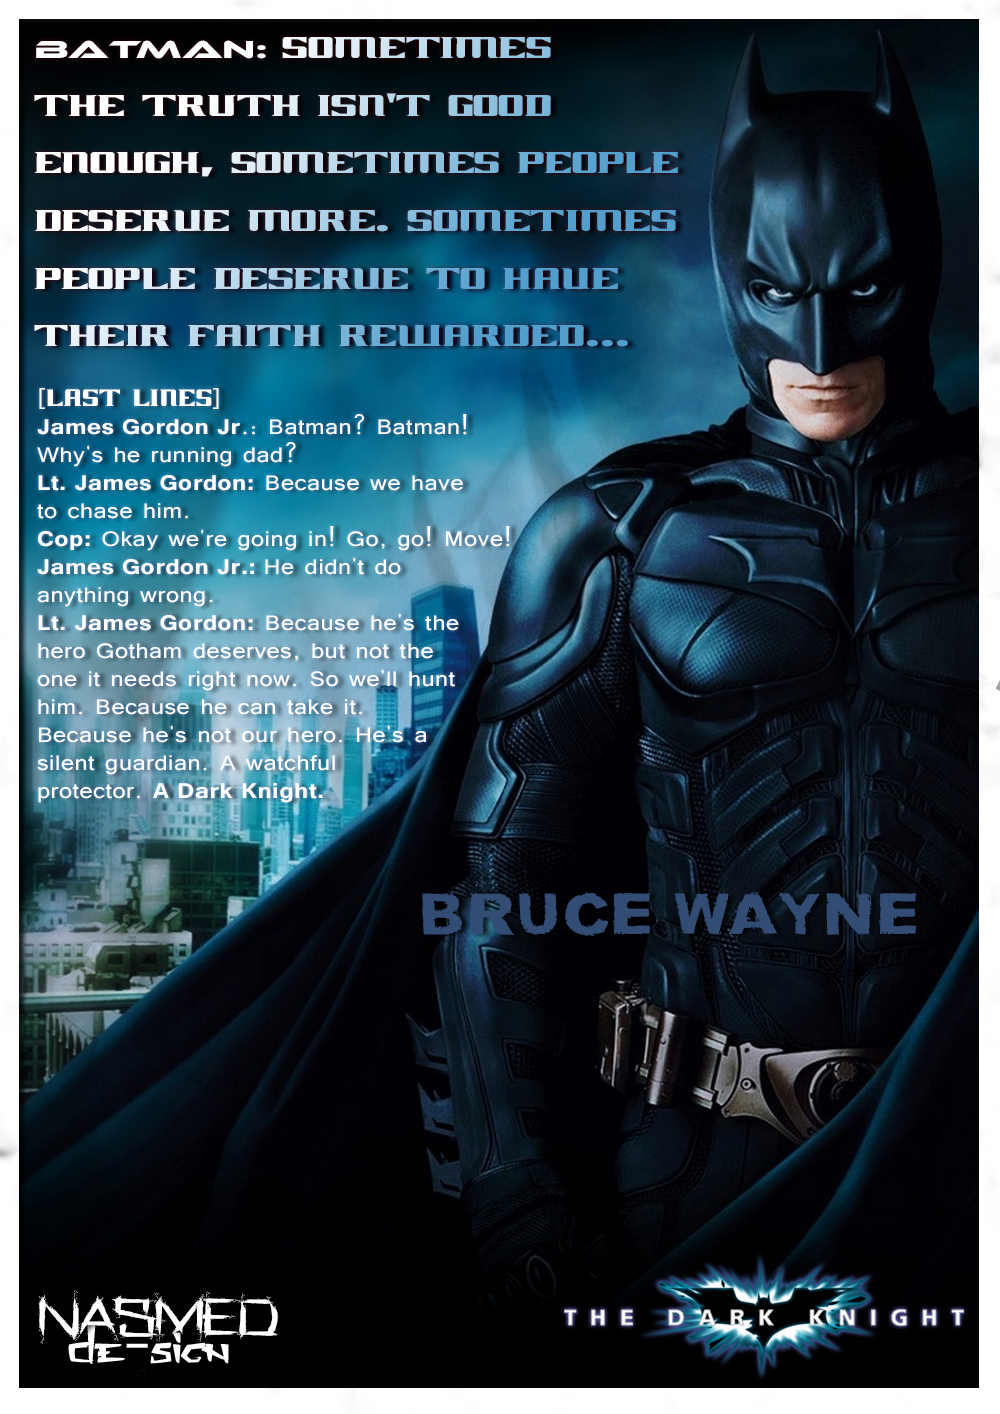 The Dark Knight (2008) Quotes by NasSimox95 on DeviantArt